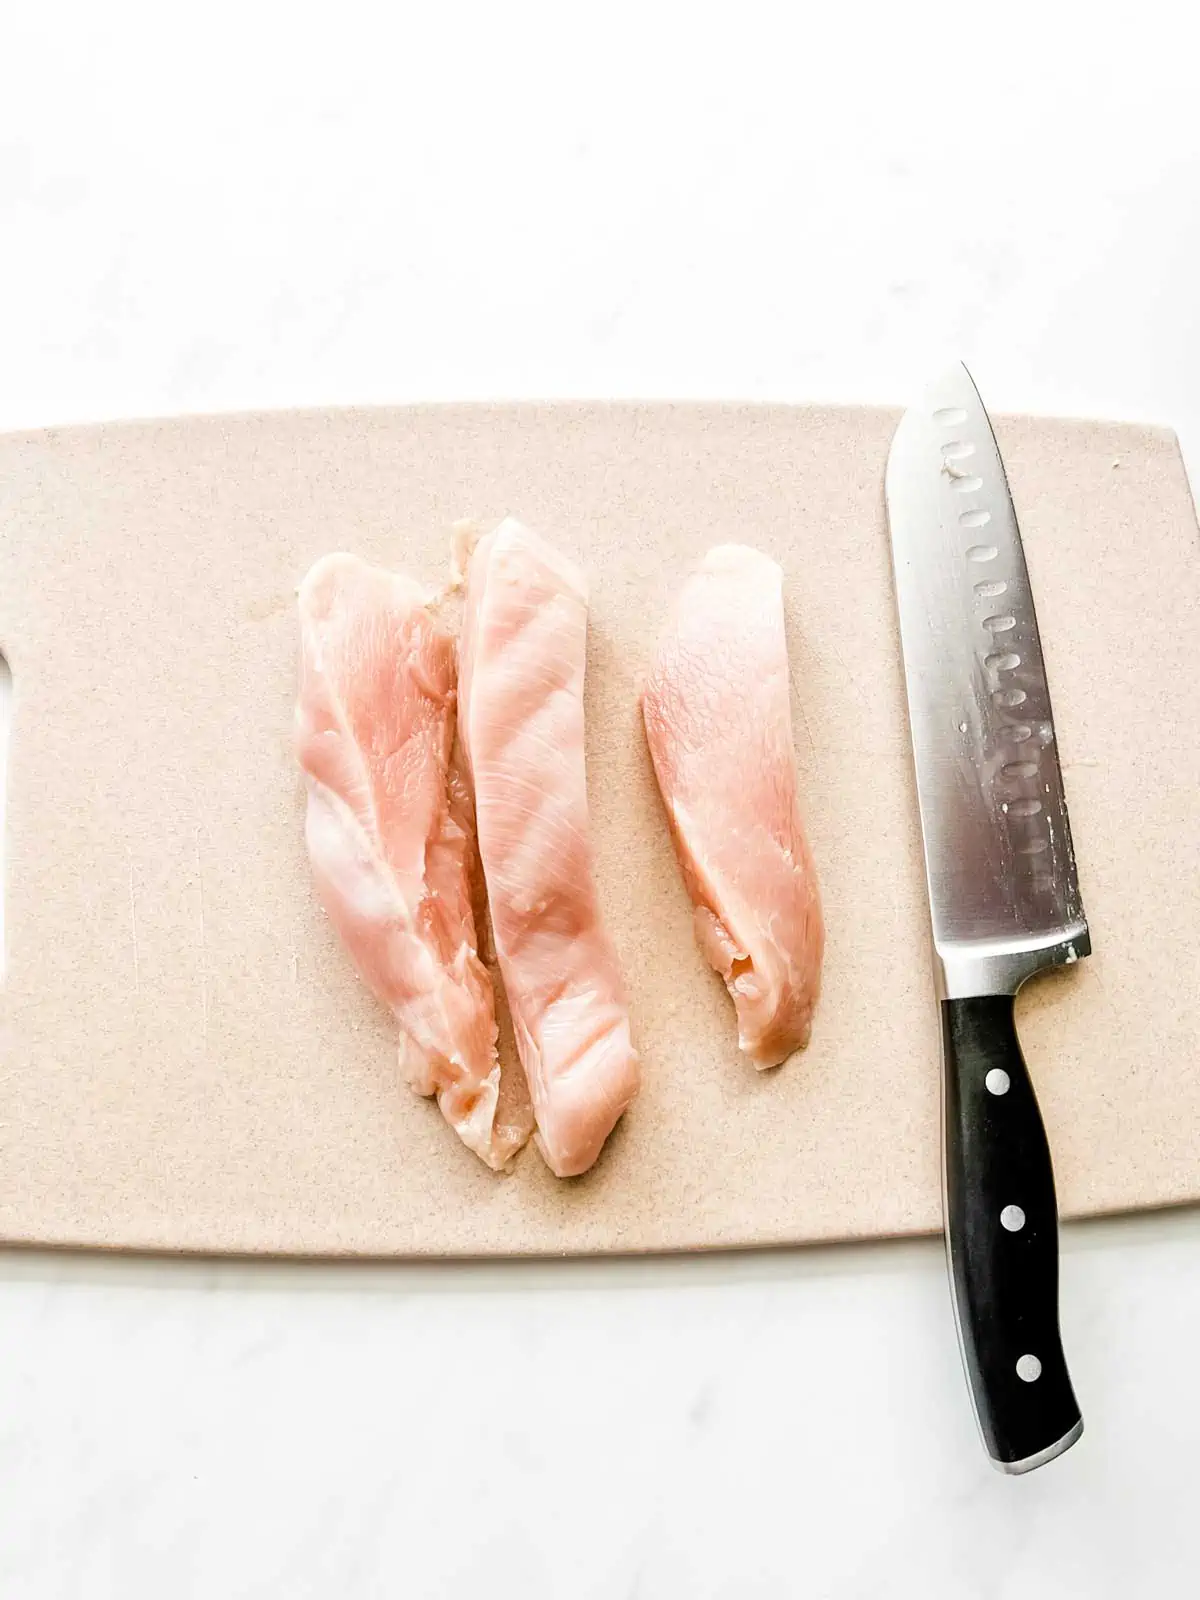 Photo of boneless skinless chicken breast on a cutting board.